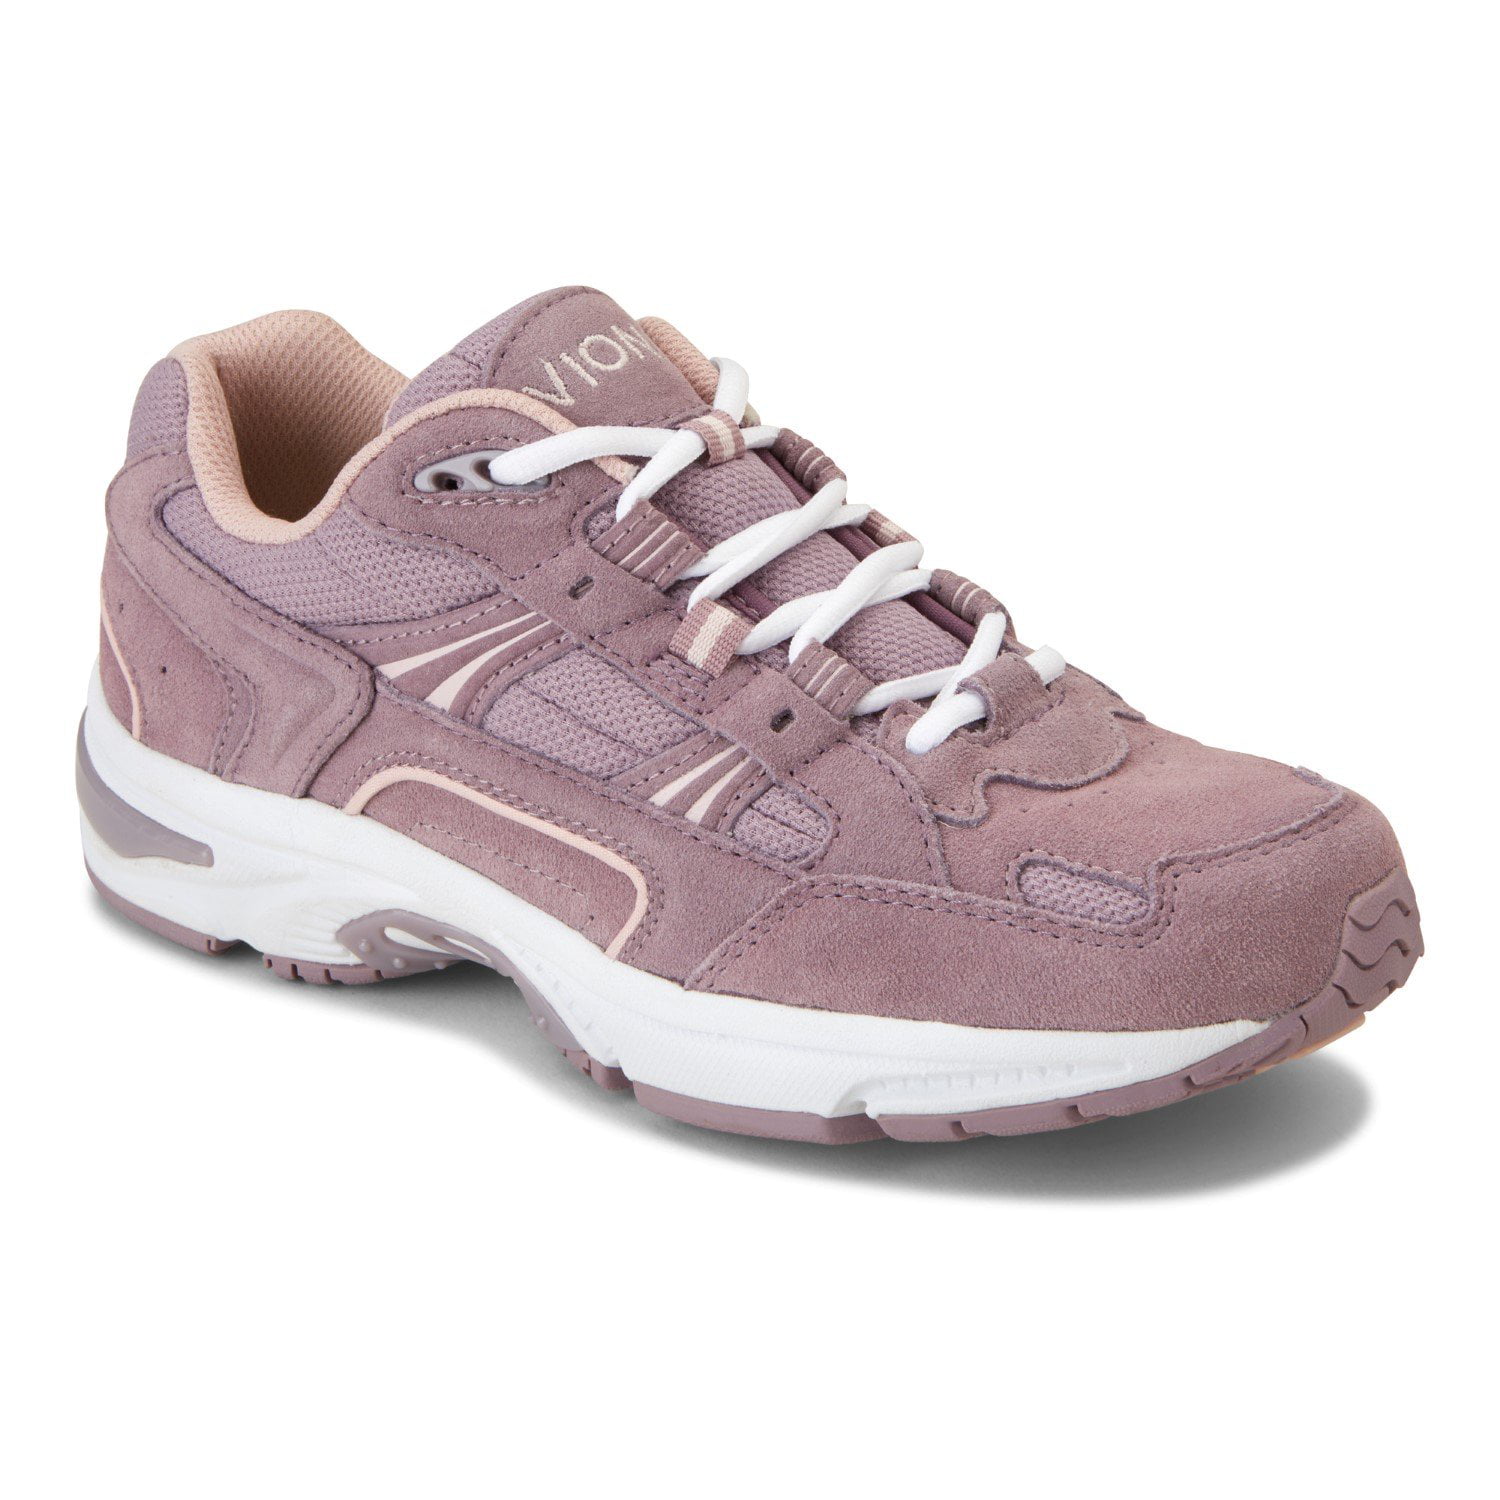 planters fasciitis shoes for women